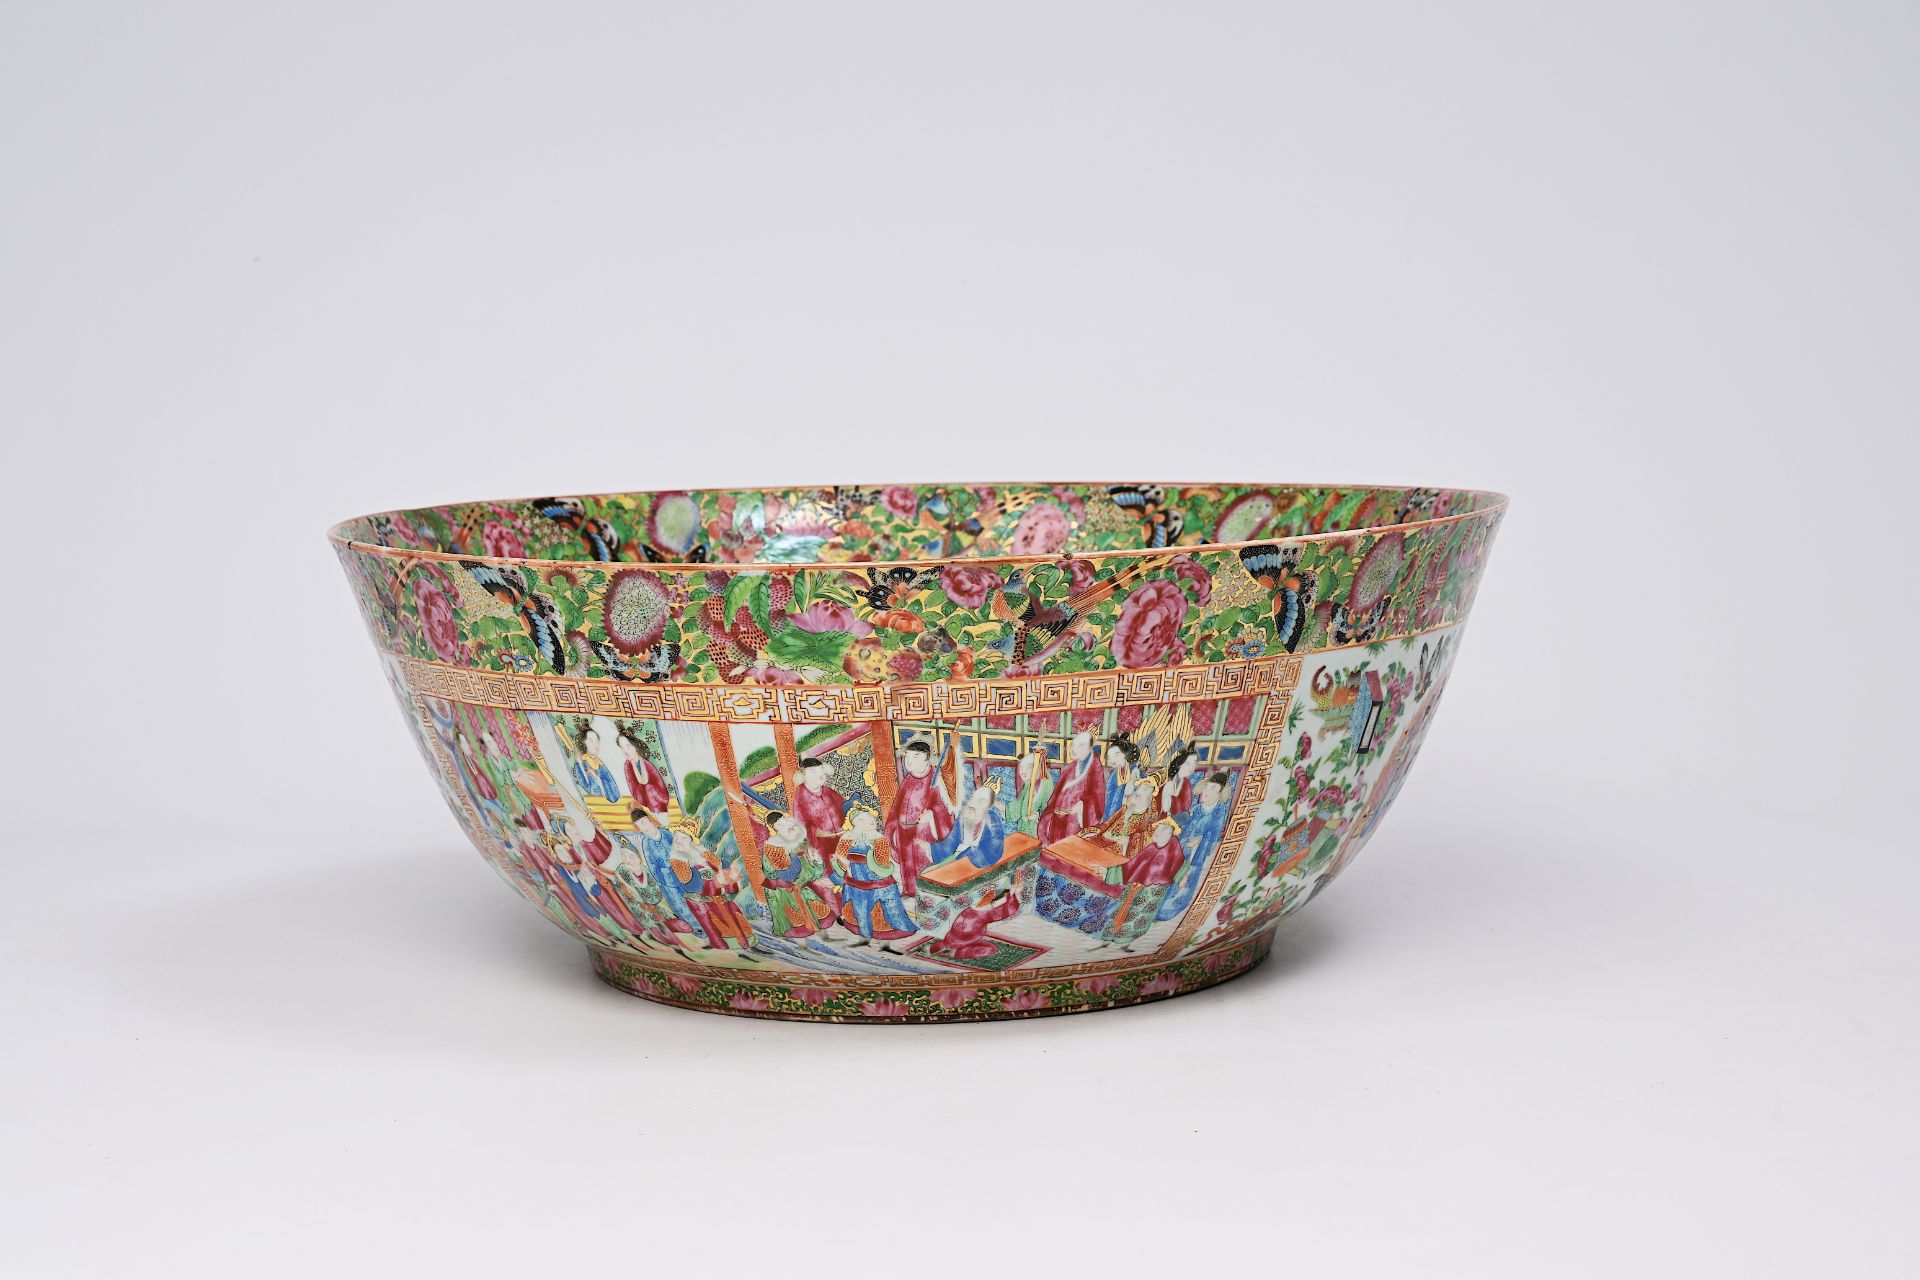 An imposing Chinese Canton famille rose bowl with palace scenes, antiquities and floral design, 19th